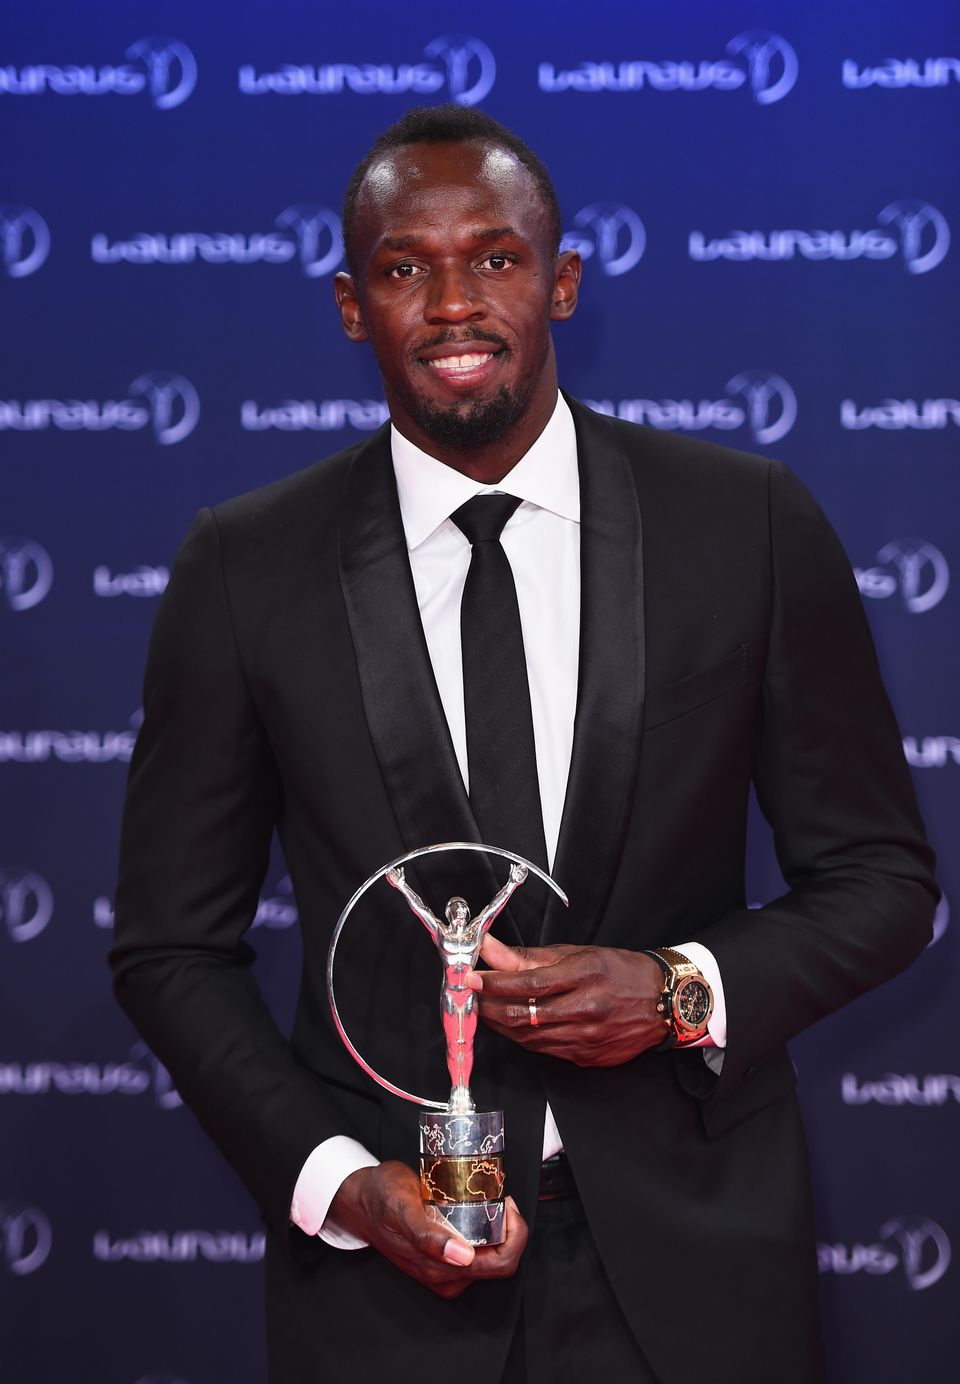 Laureus World Sports Awards after-party, sponsored by Patrón Tequila